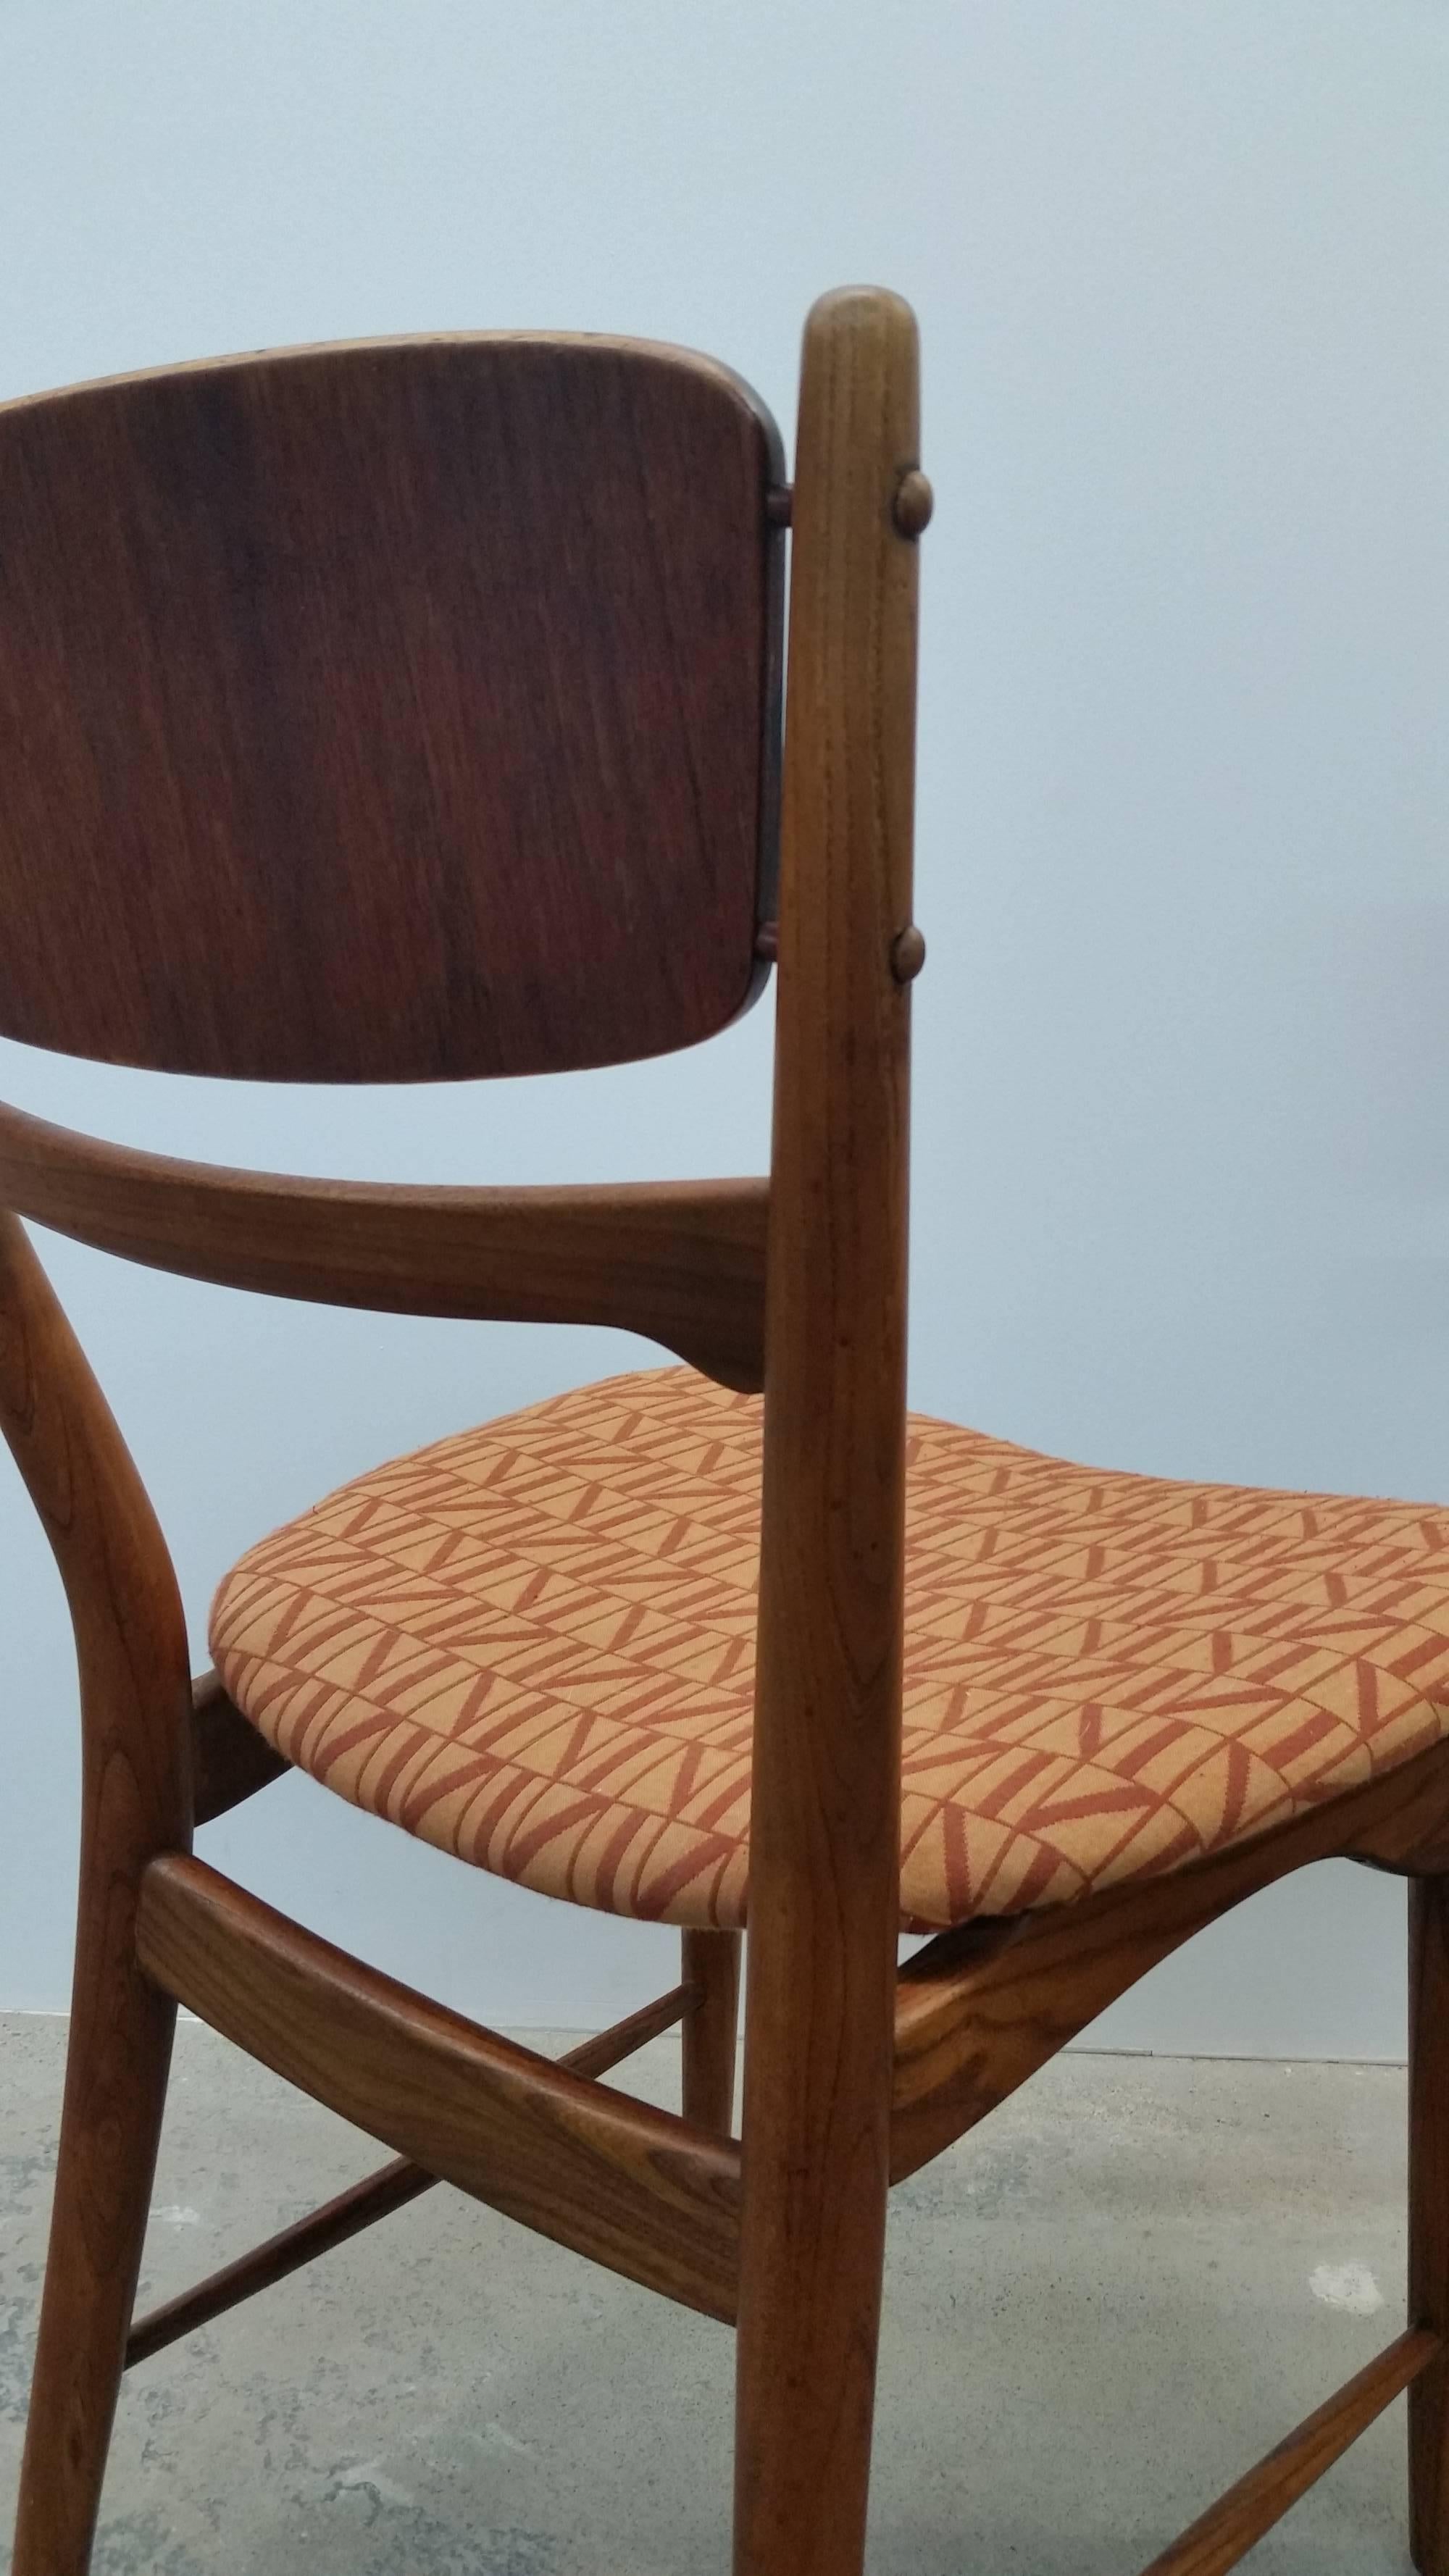 Set of Four Dining Chairs in Walnut and Teak, by Arne Wahl Iversen For Sale 1